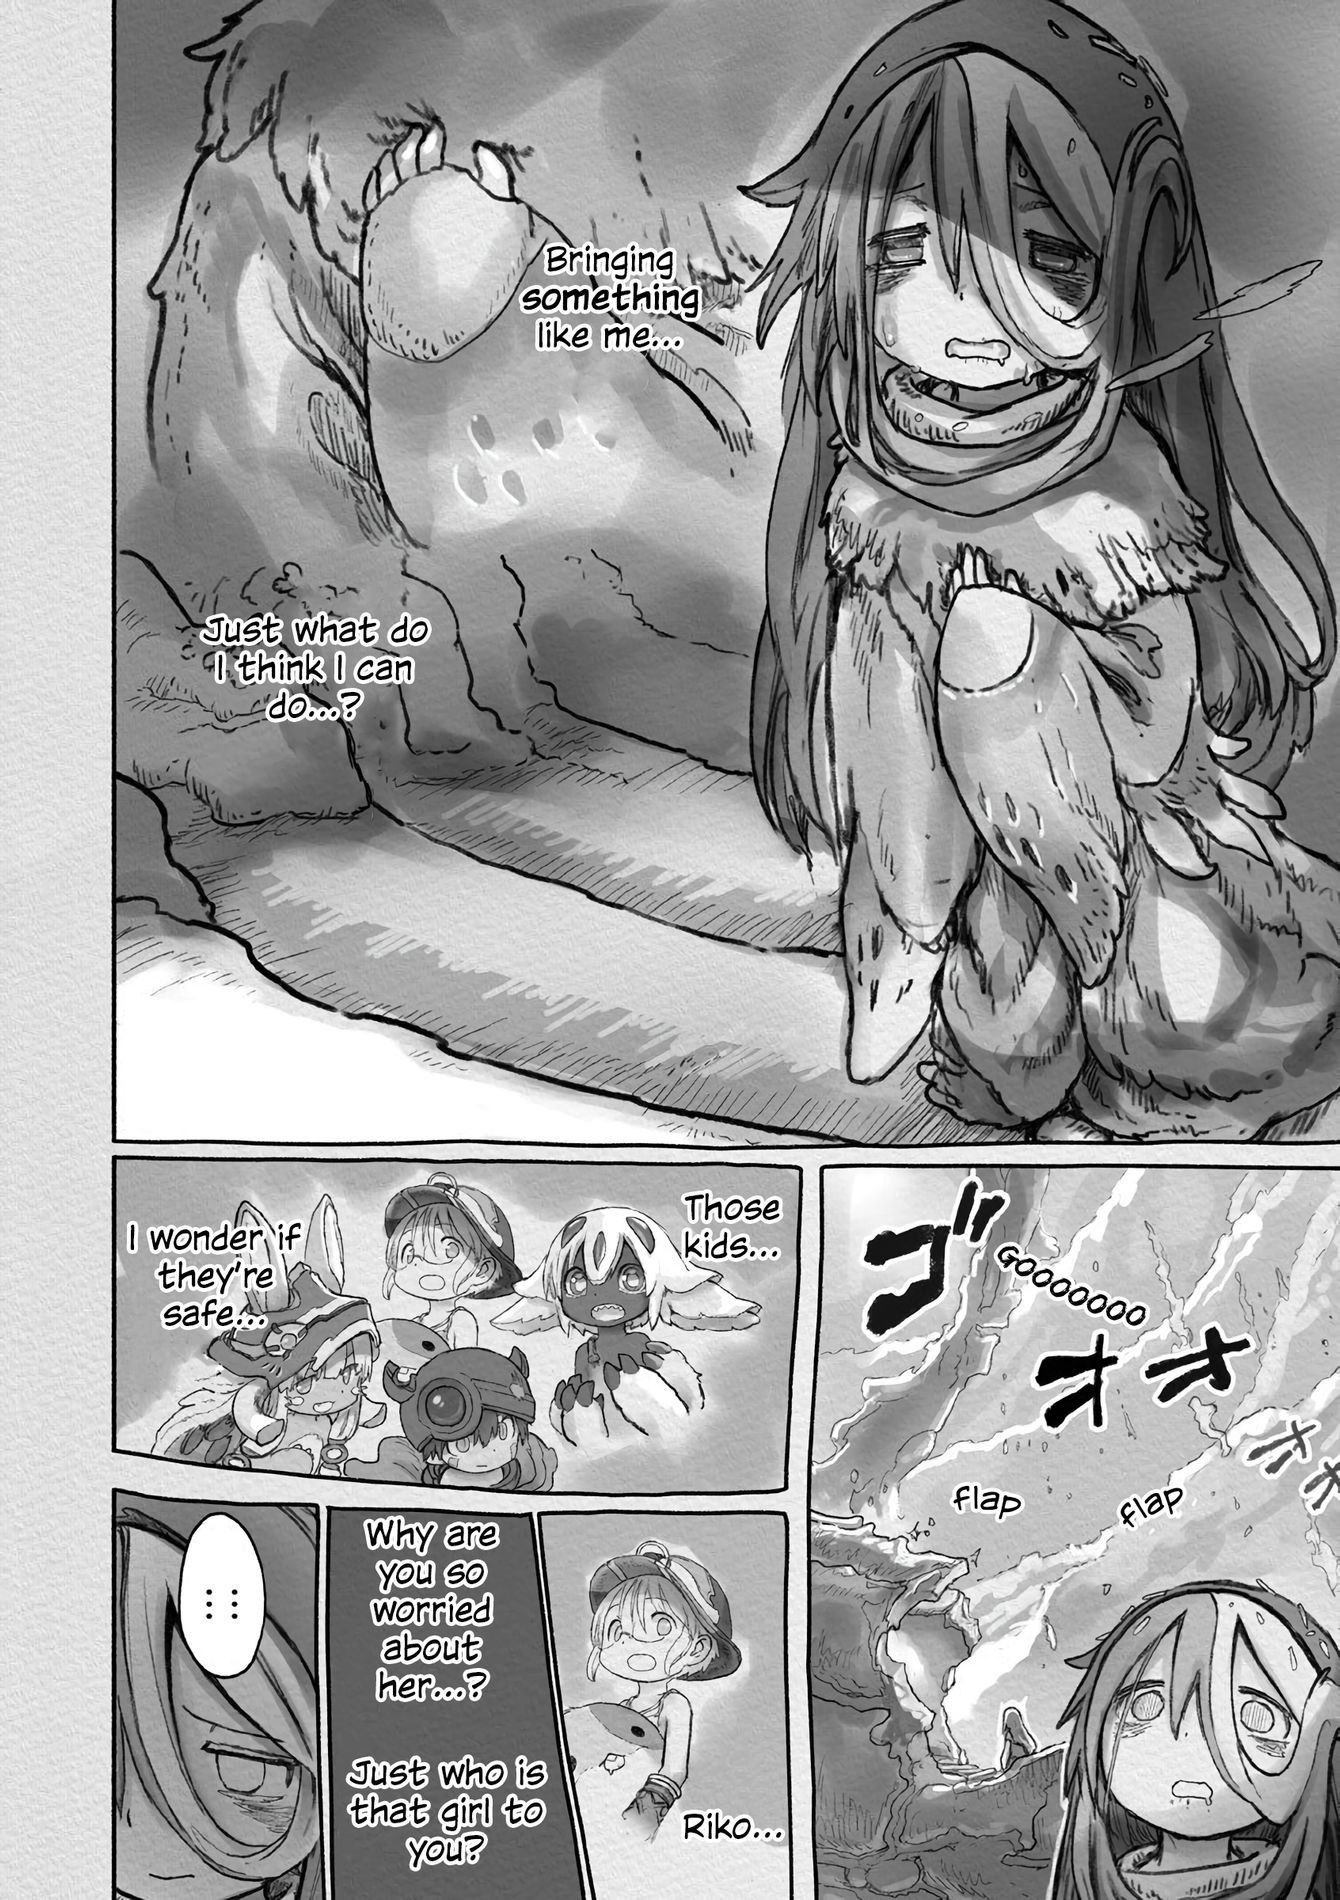 Made in Abyss Chapter 59 Discussion - Forums 